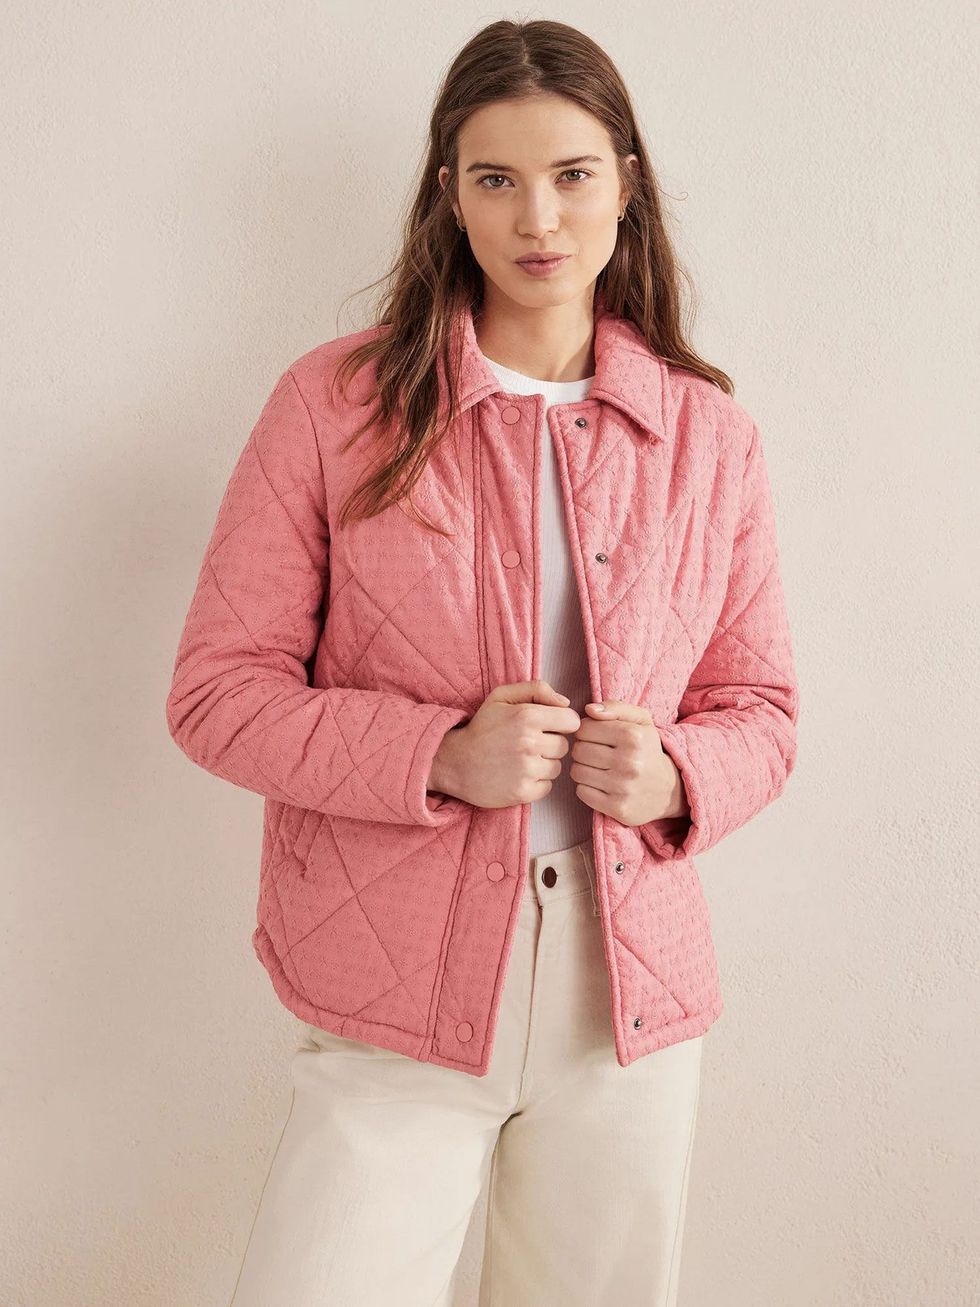 Broderie Quilted Cotton Jacket - Was £120, now £60